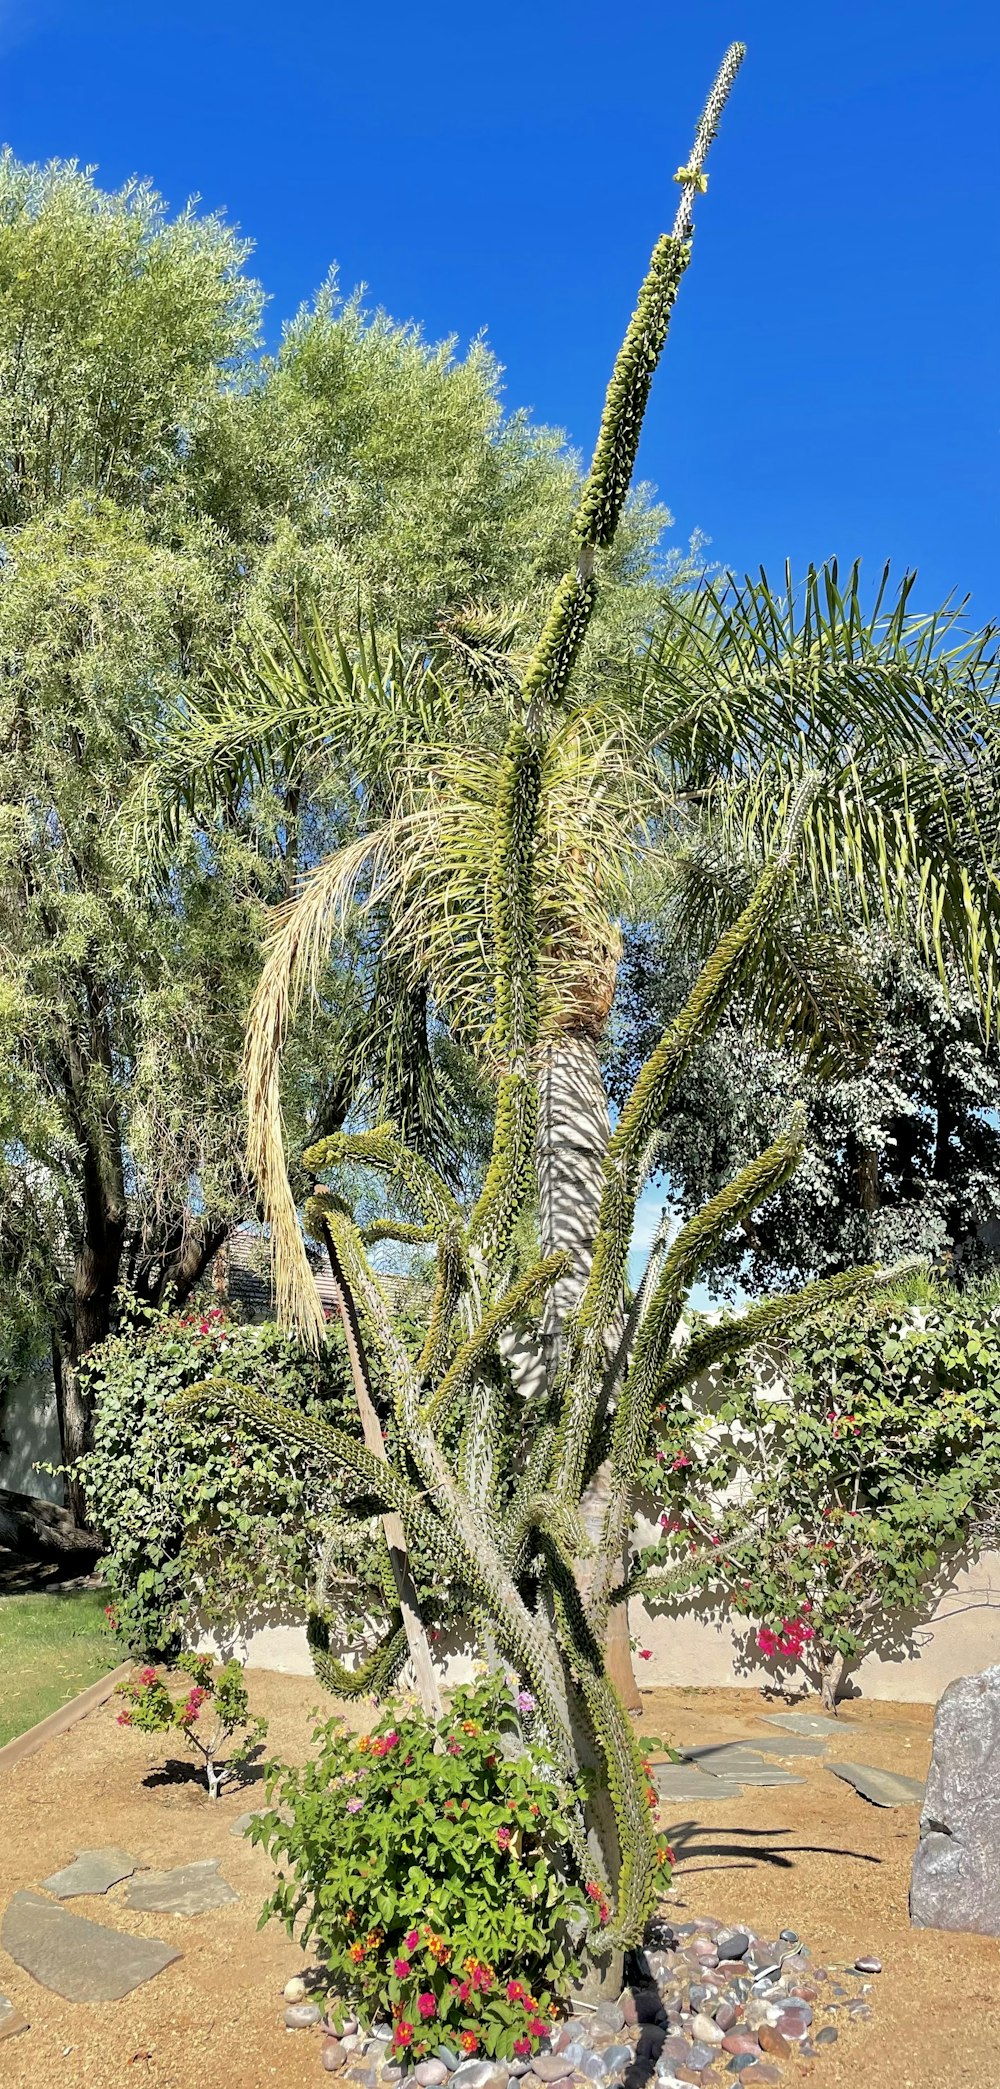 a large cactus tree in the middle of a garden